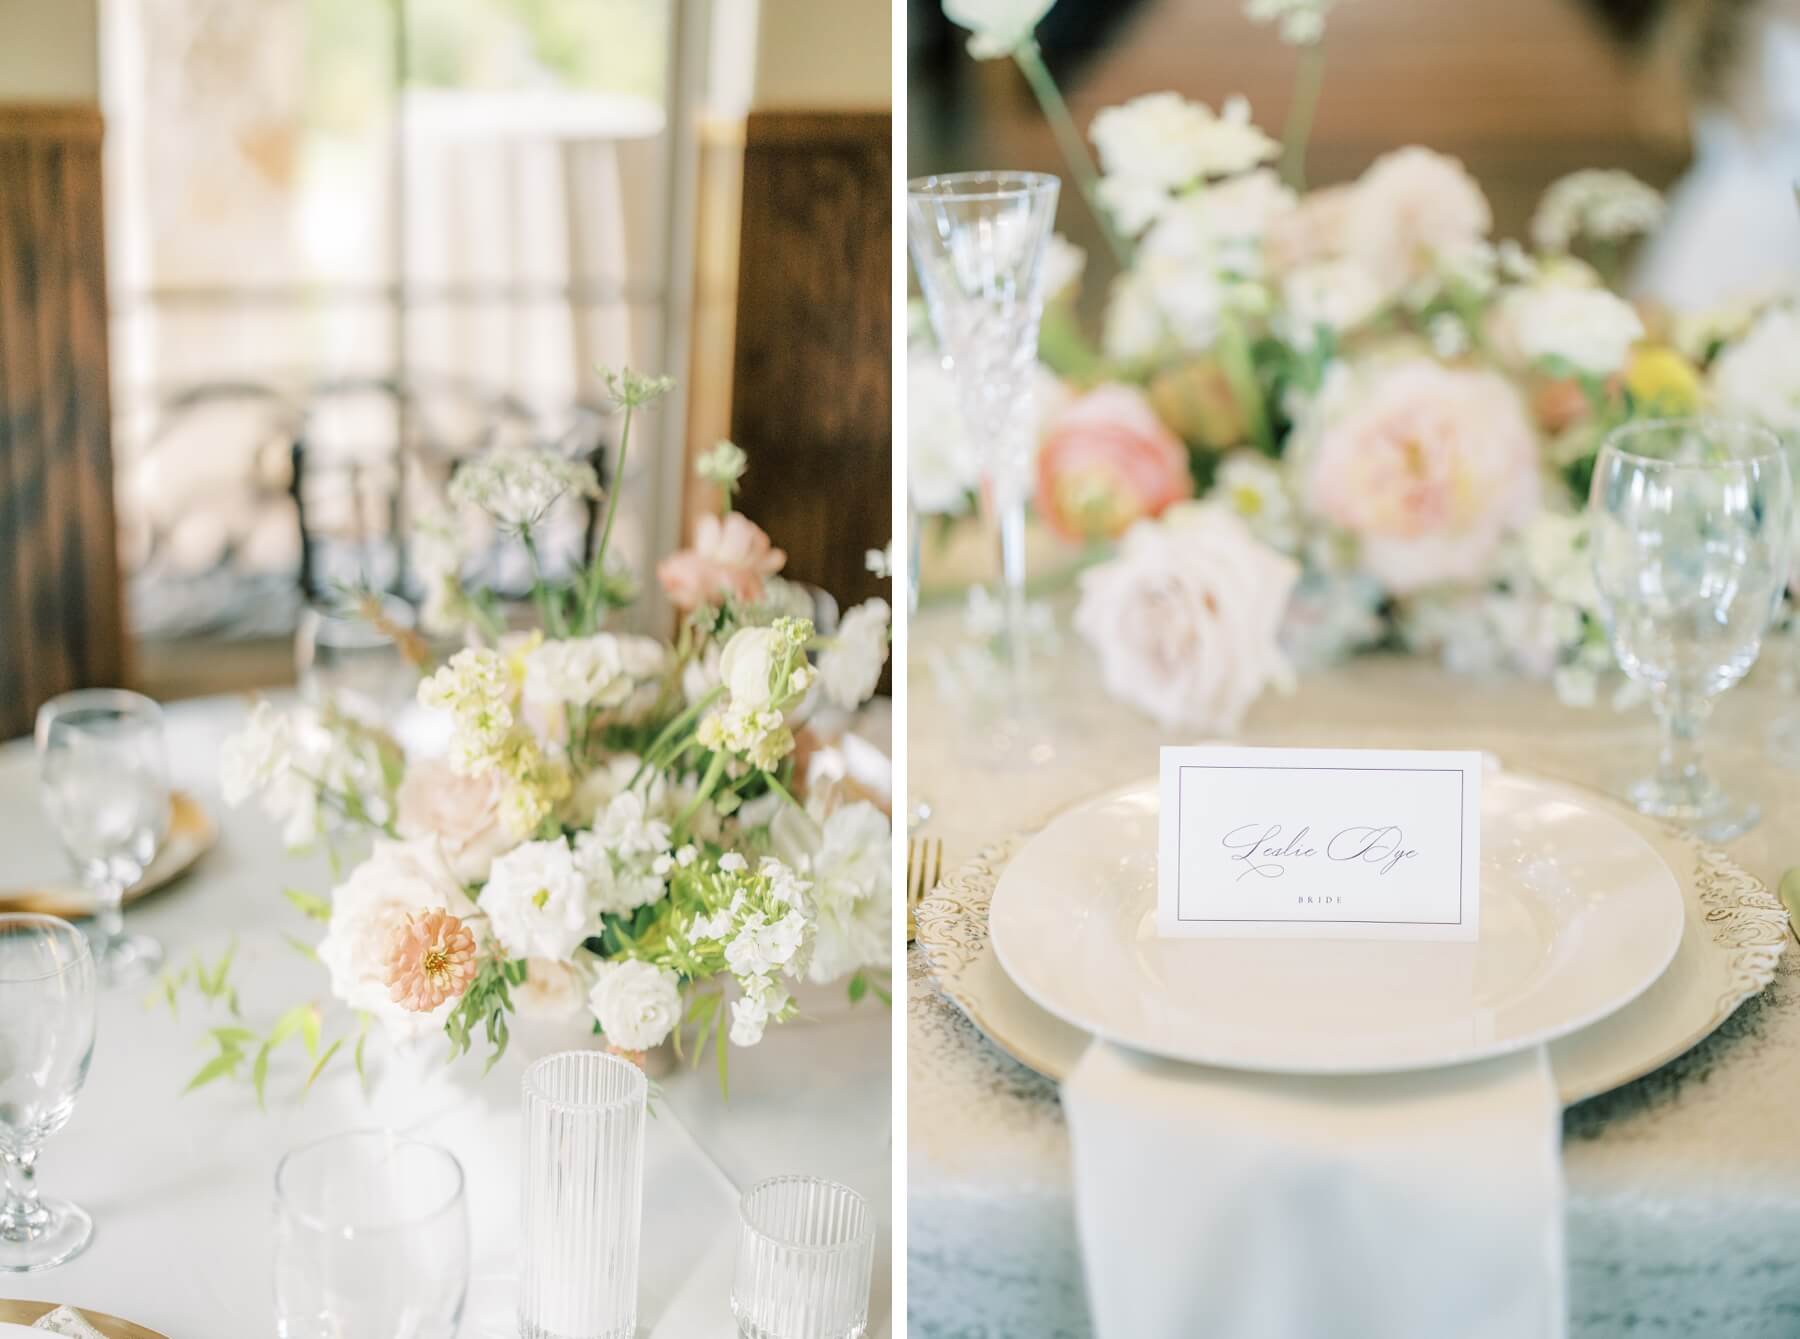 Pastel floral arrangements on wedding reception table with ivory place setting and white place card